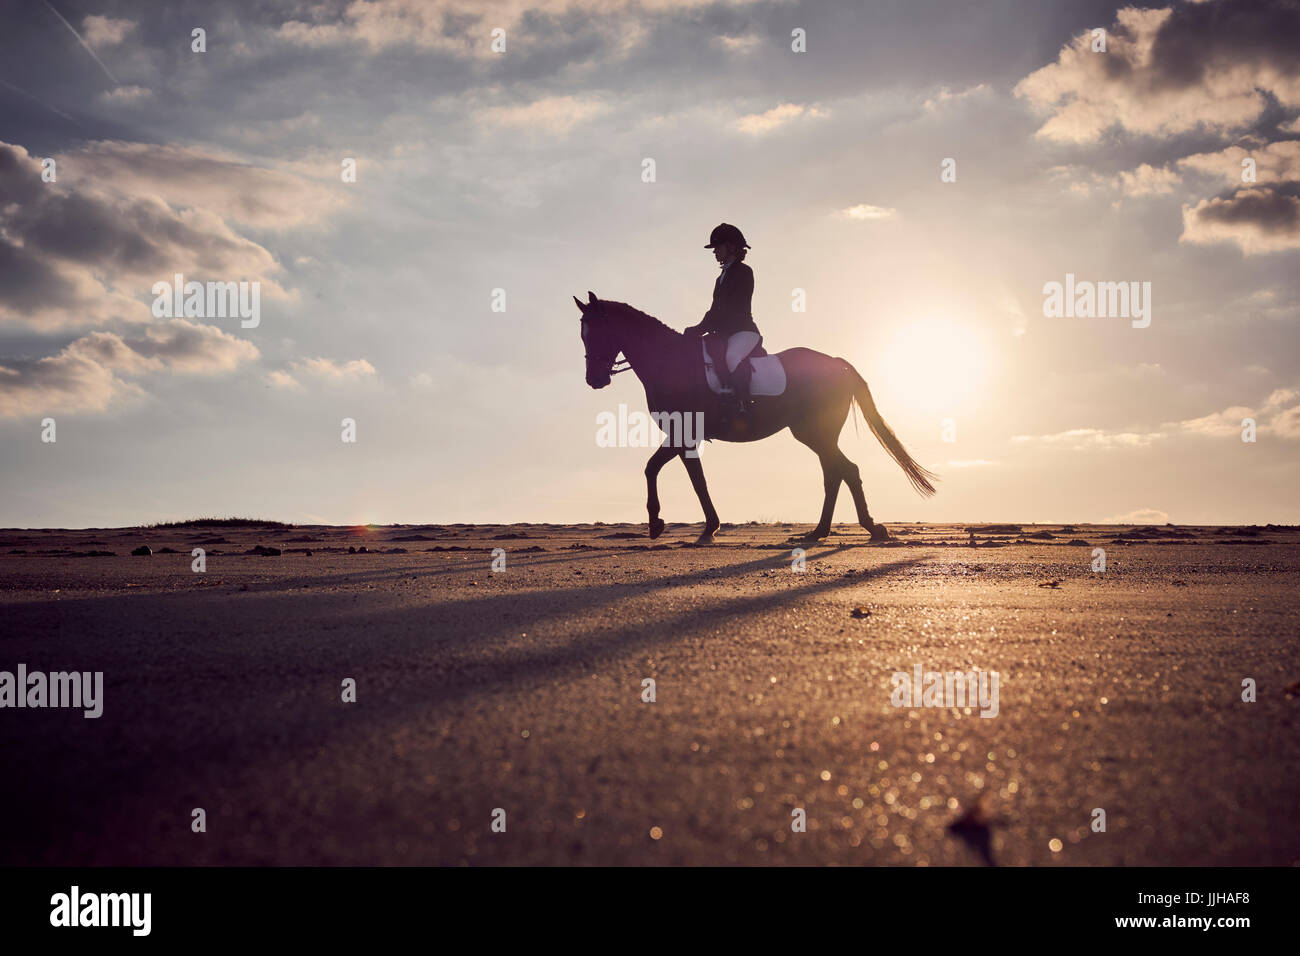 A young woman riding her horse on the beach at sunset. Stock Photo